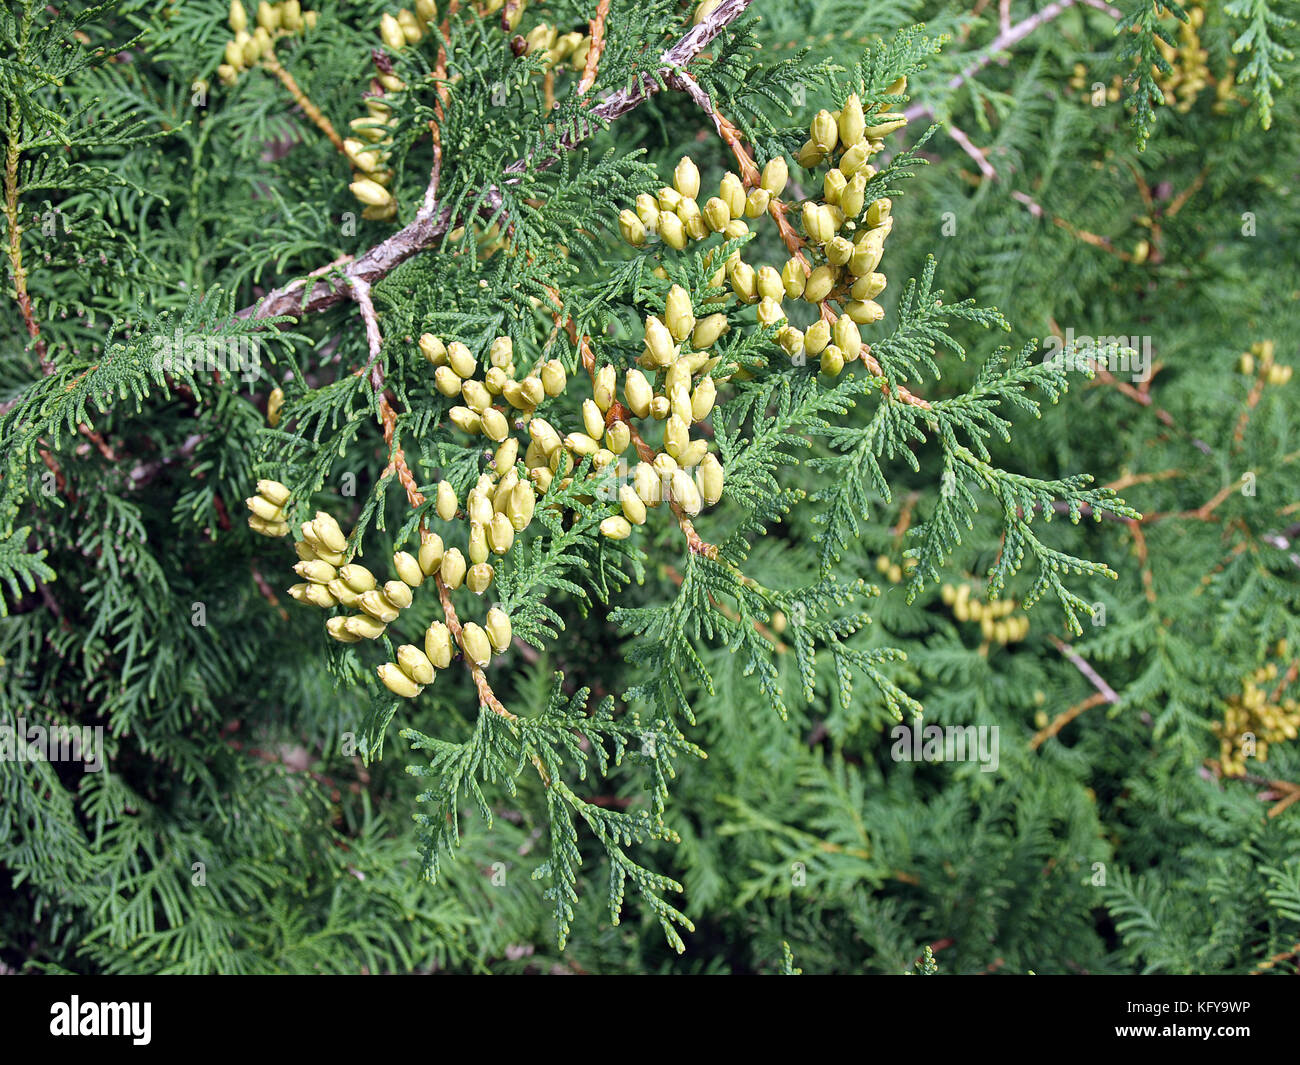 Arborvitae thuja shrub with lot of seed pods Stock Photo